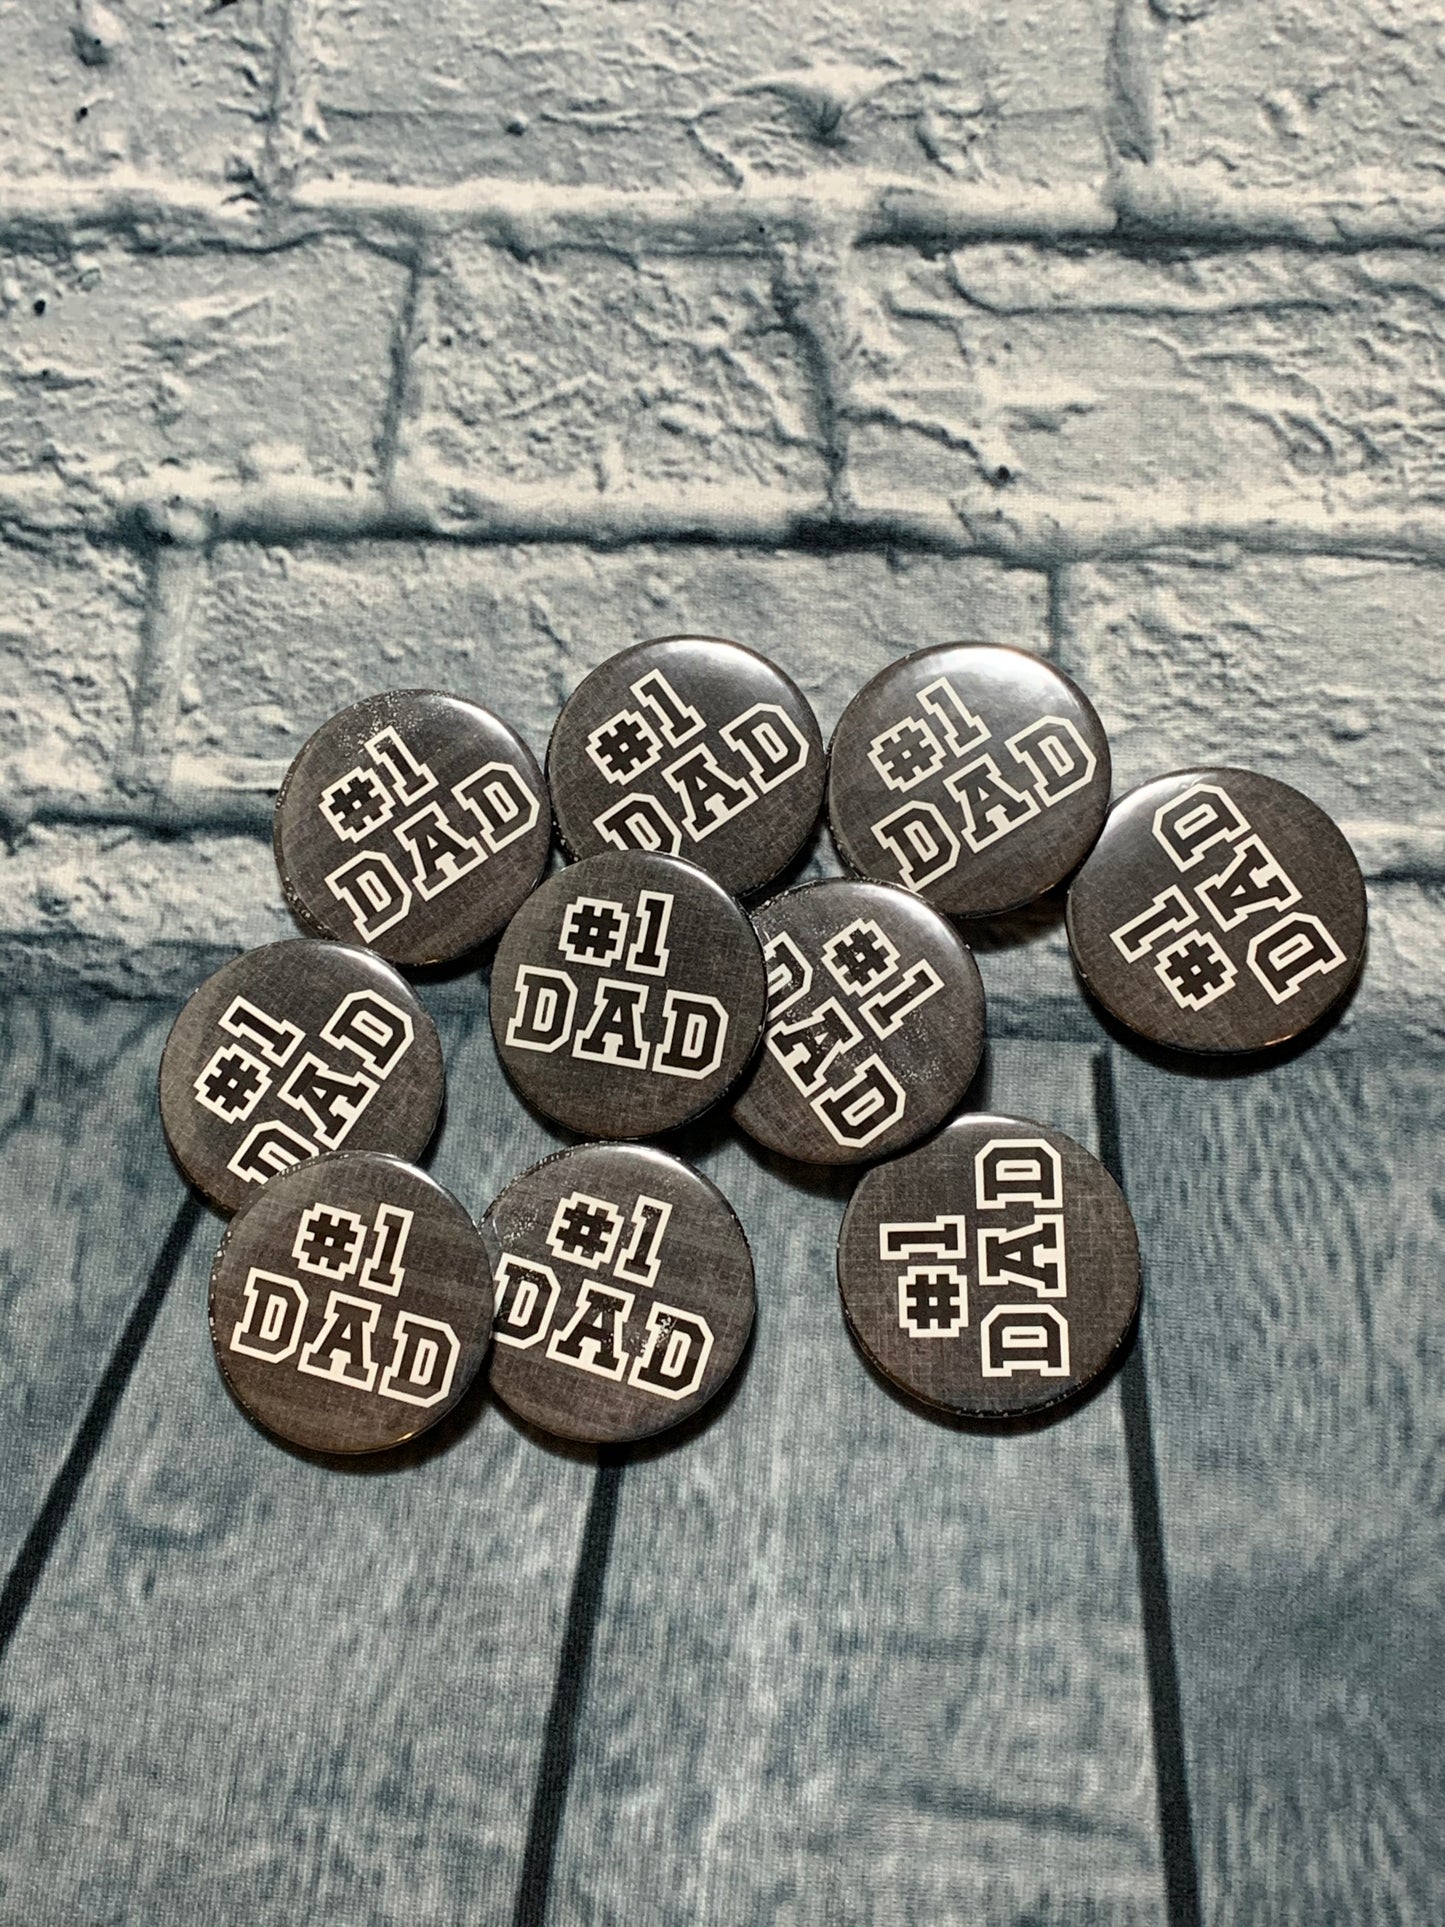 #1 DAD BUTTONS